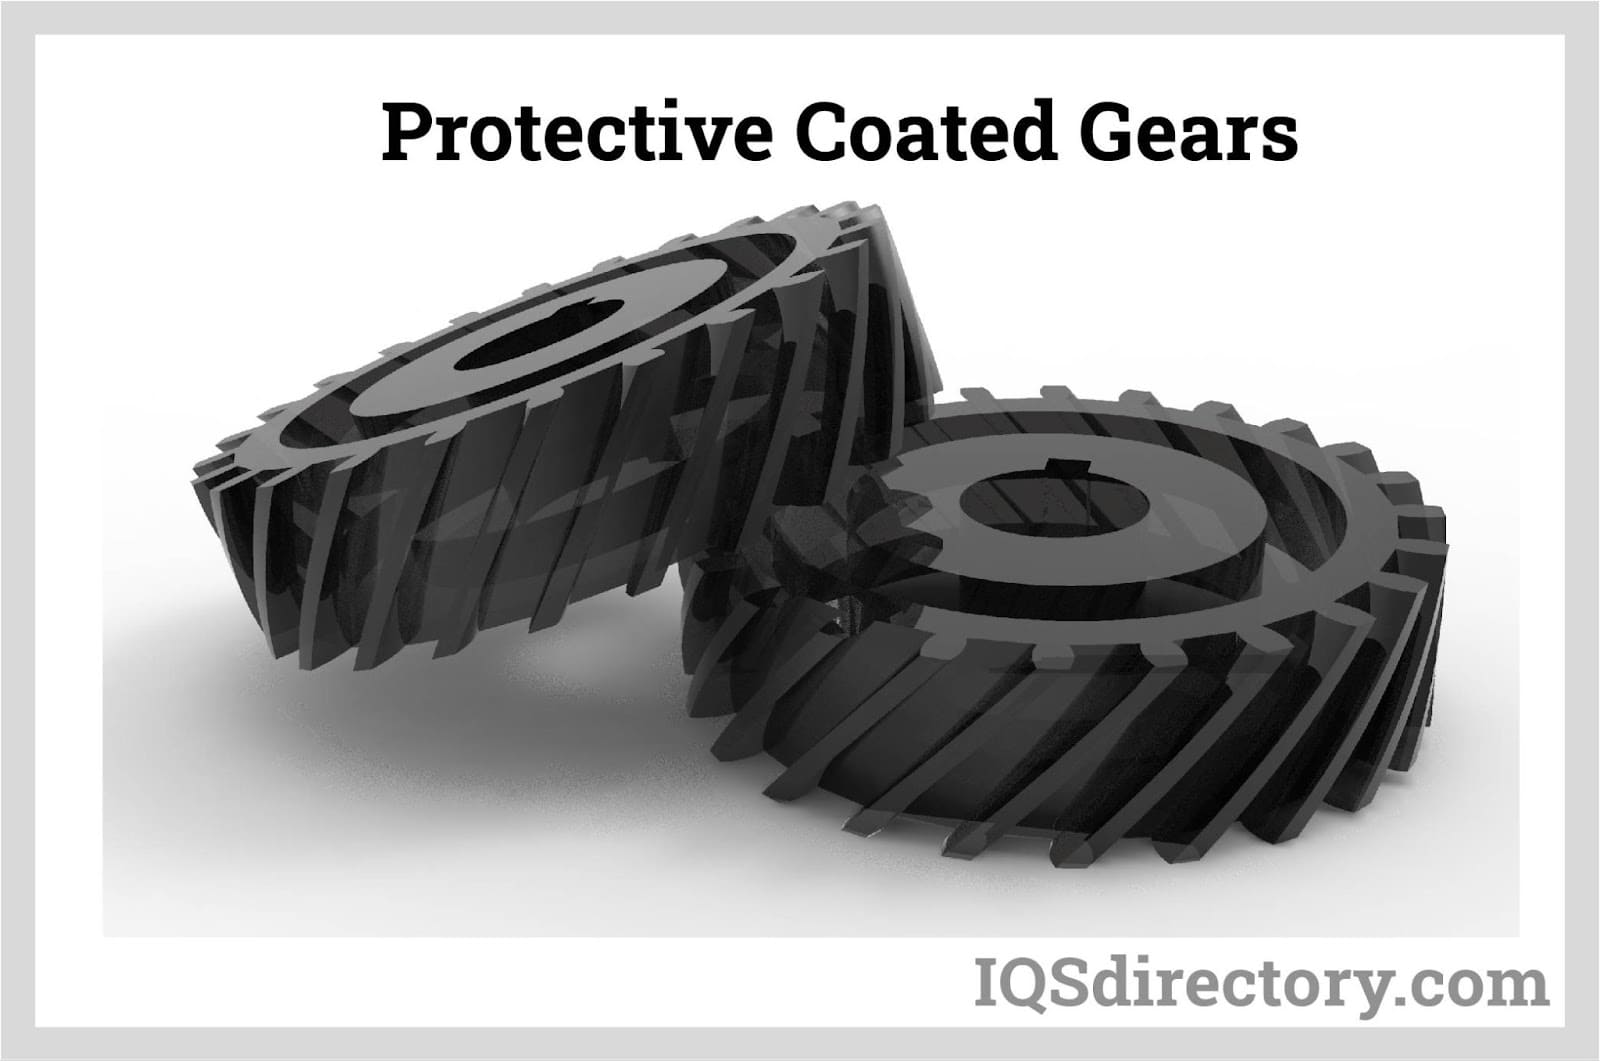 Protective Coated Gears